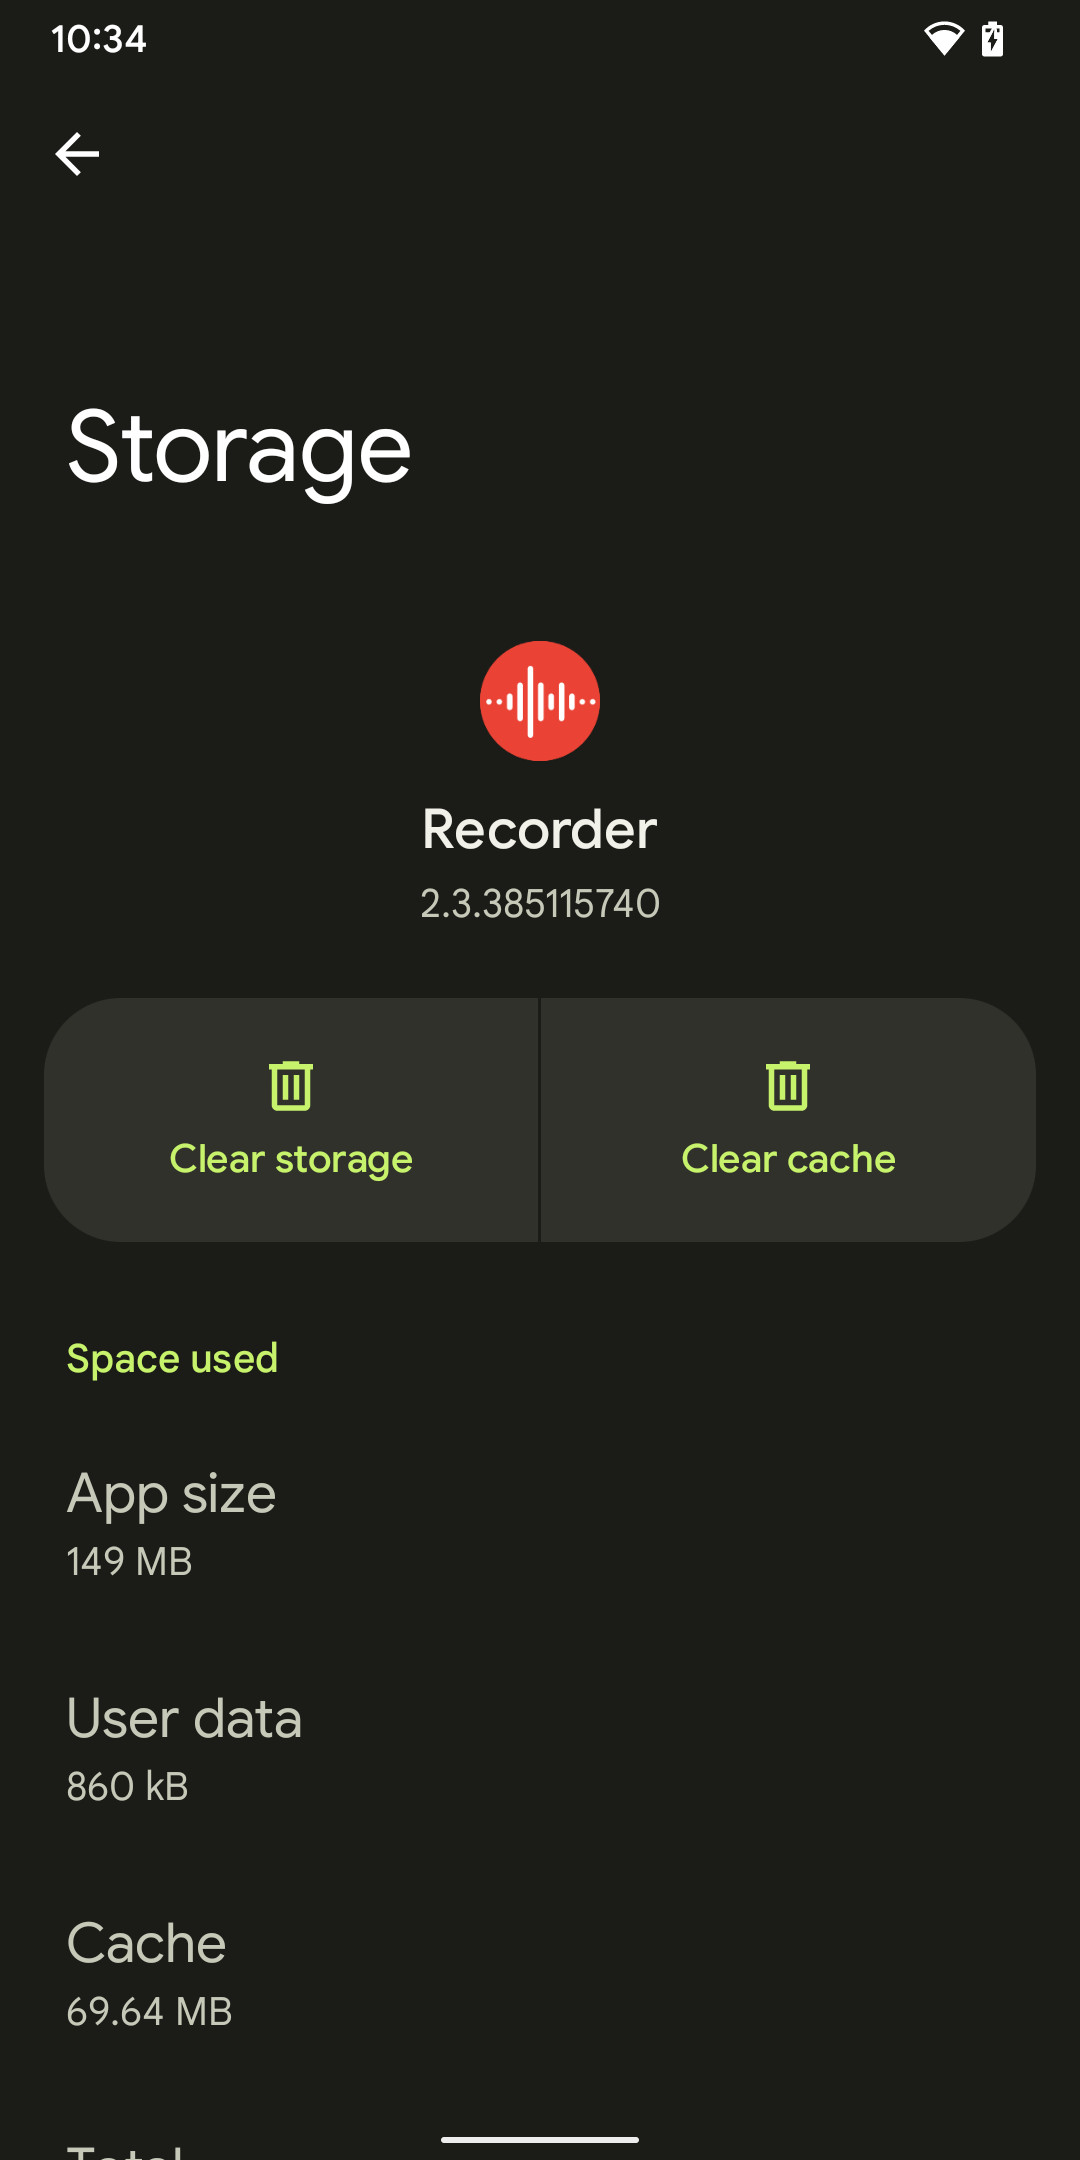 It’s a good idea to clear your cache to save space.